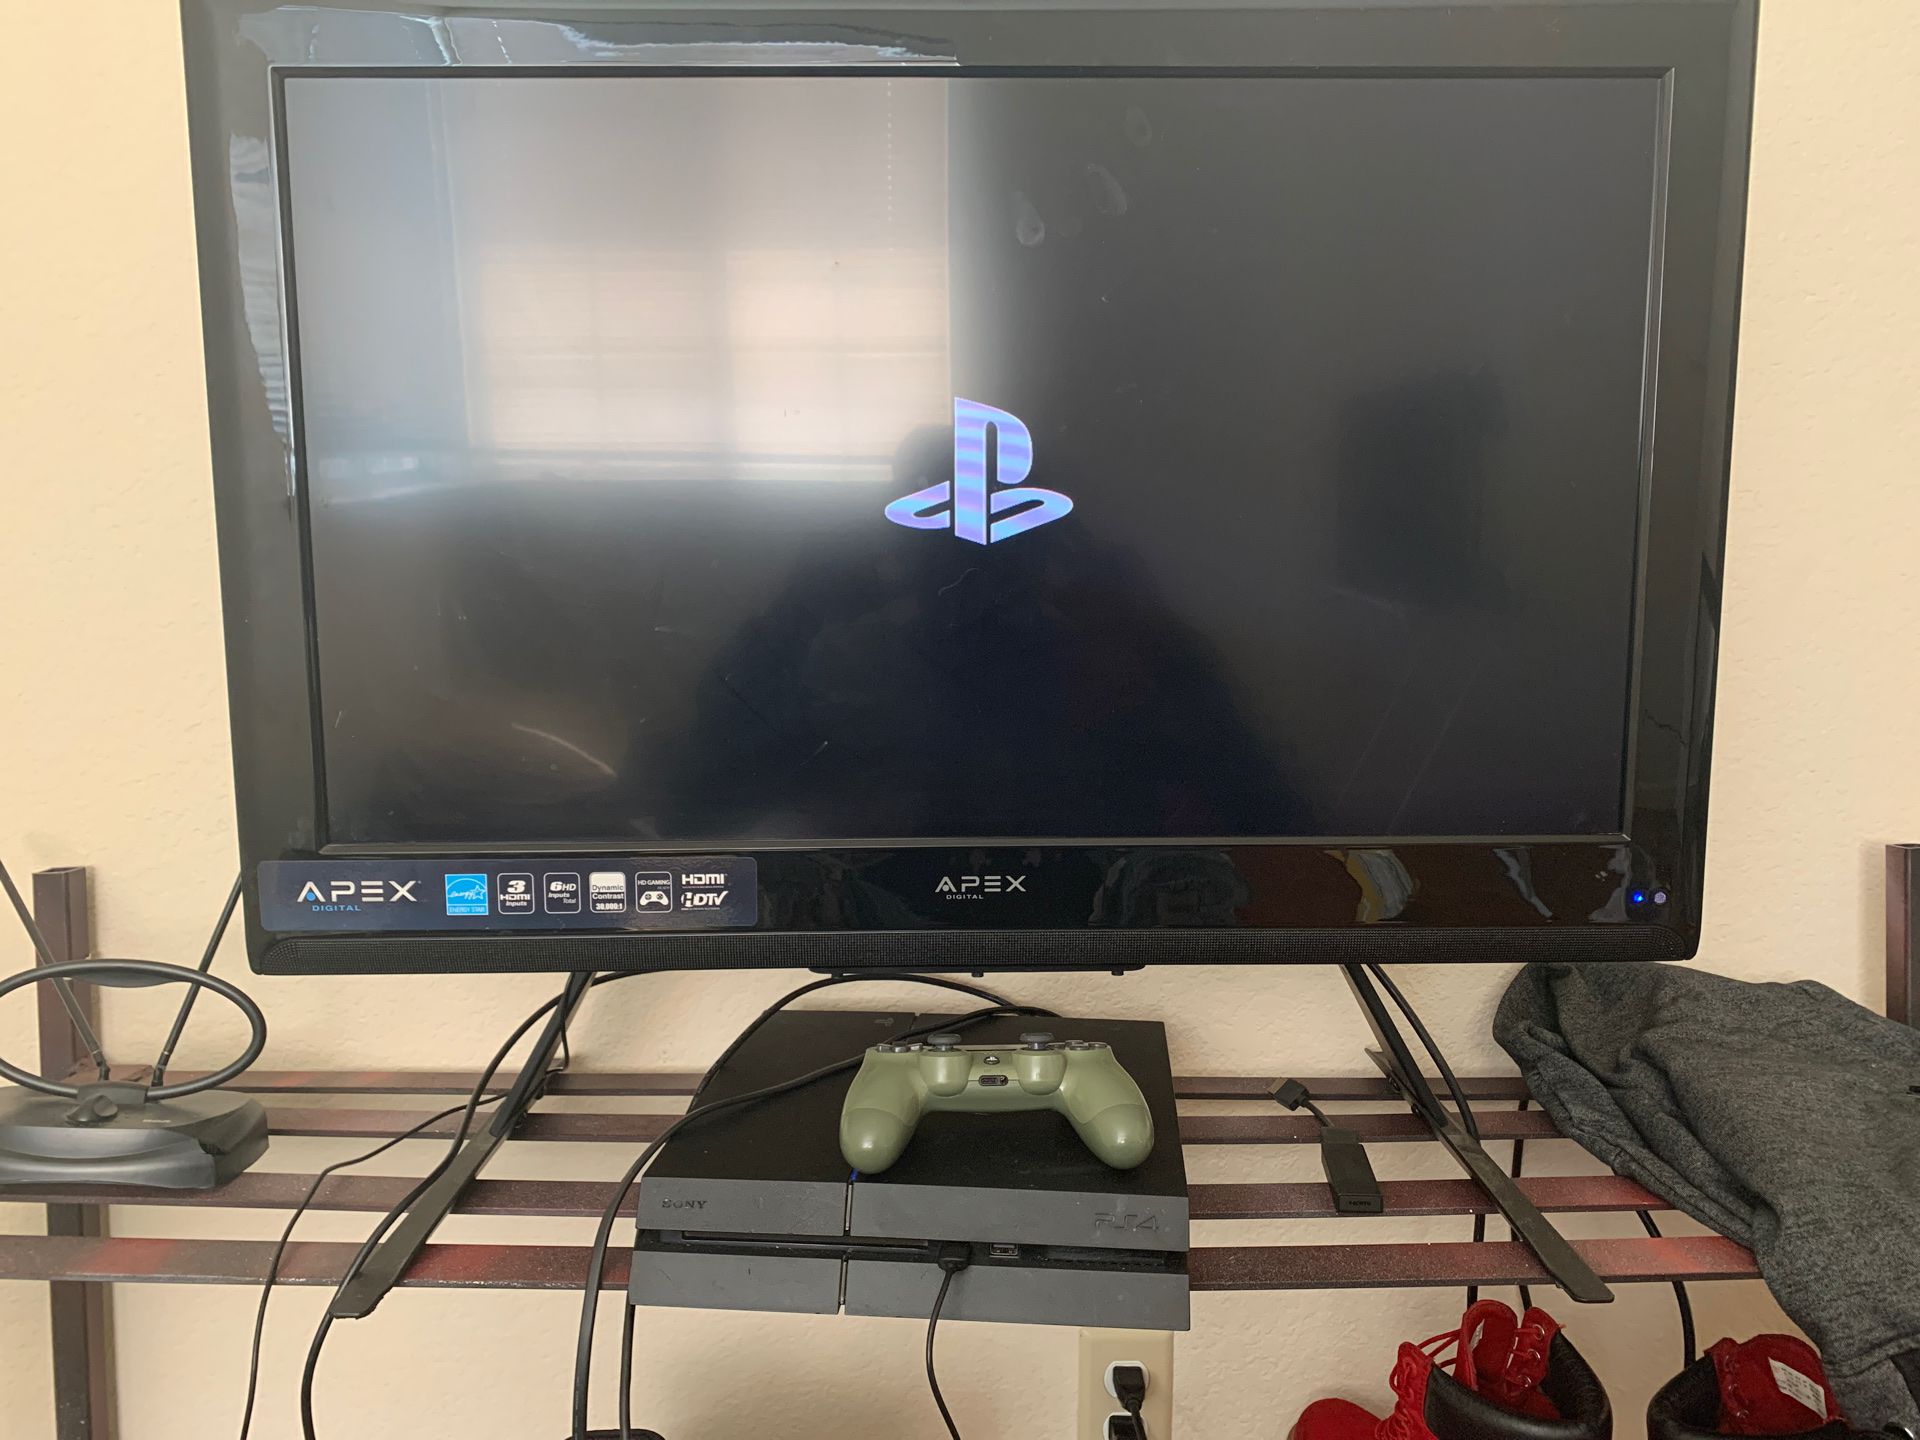 PS4 works perfectly fine games downloaded on it